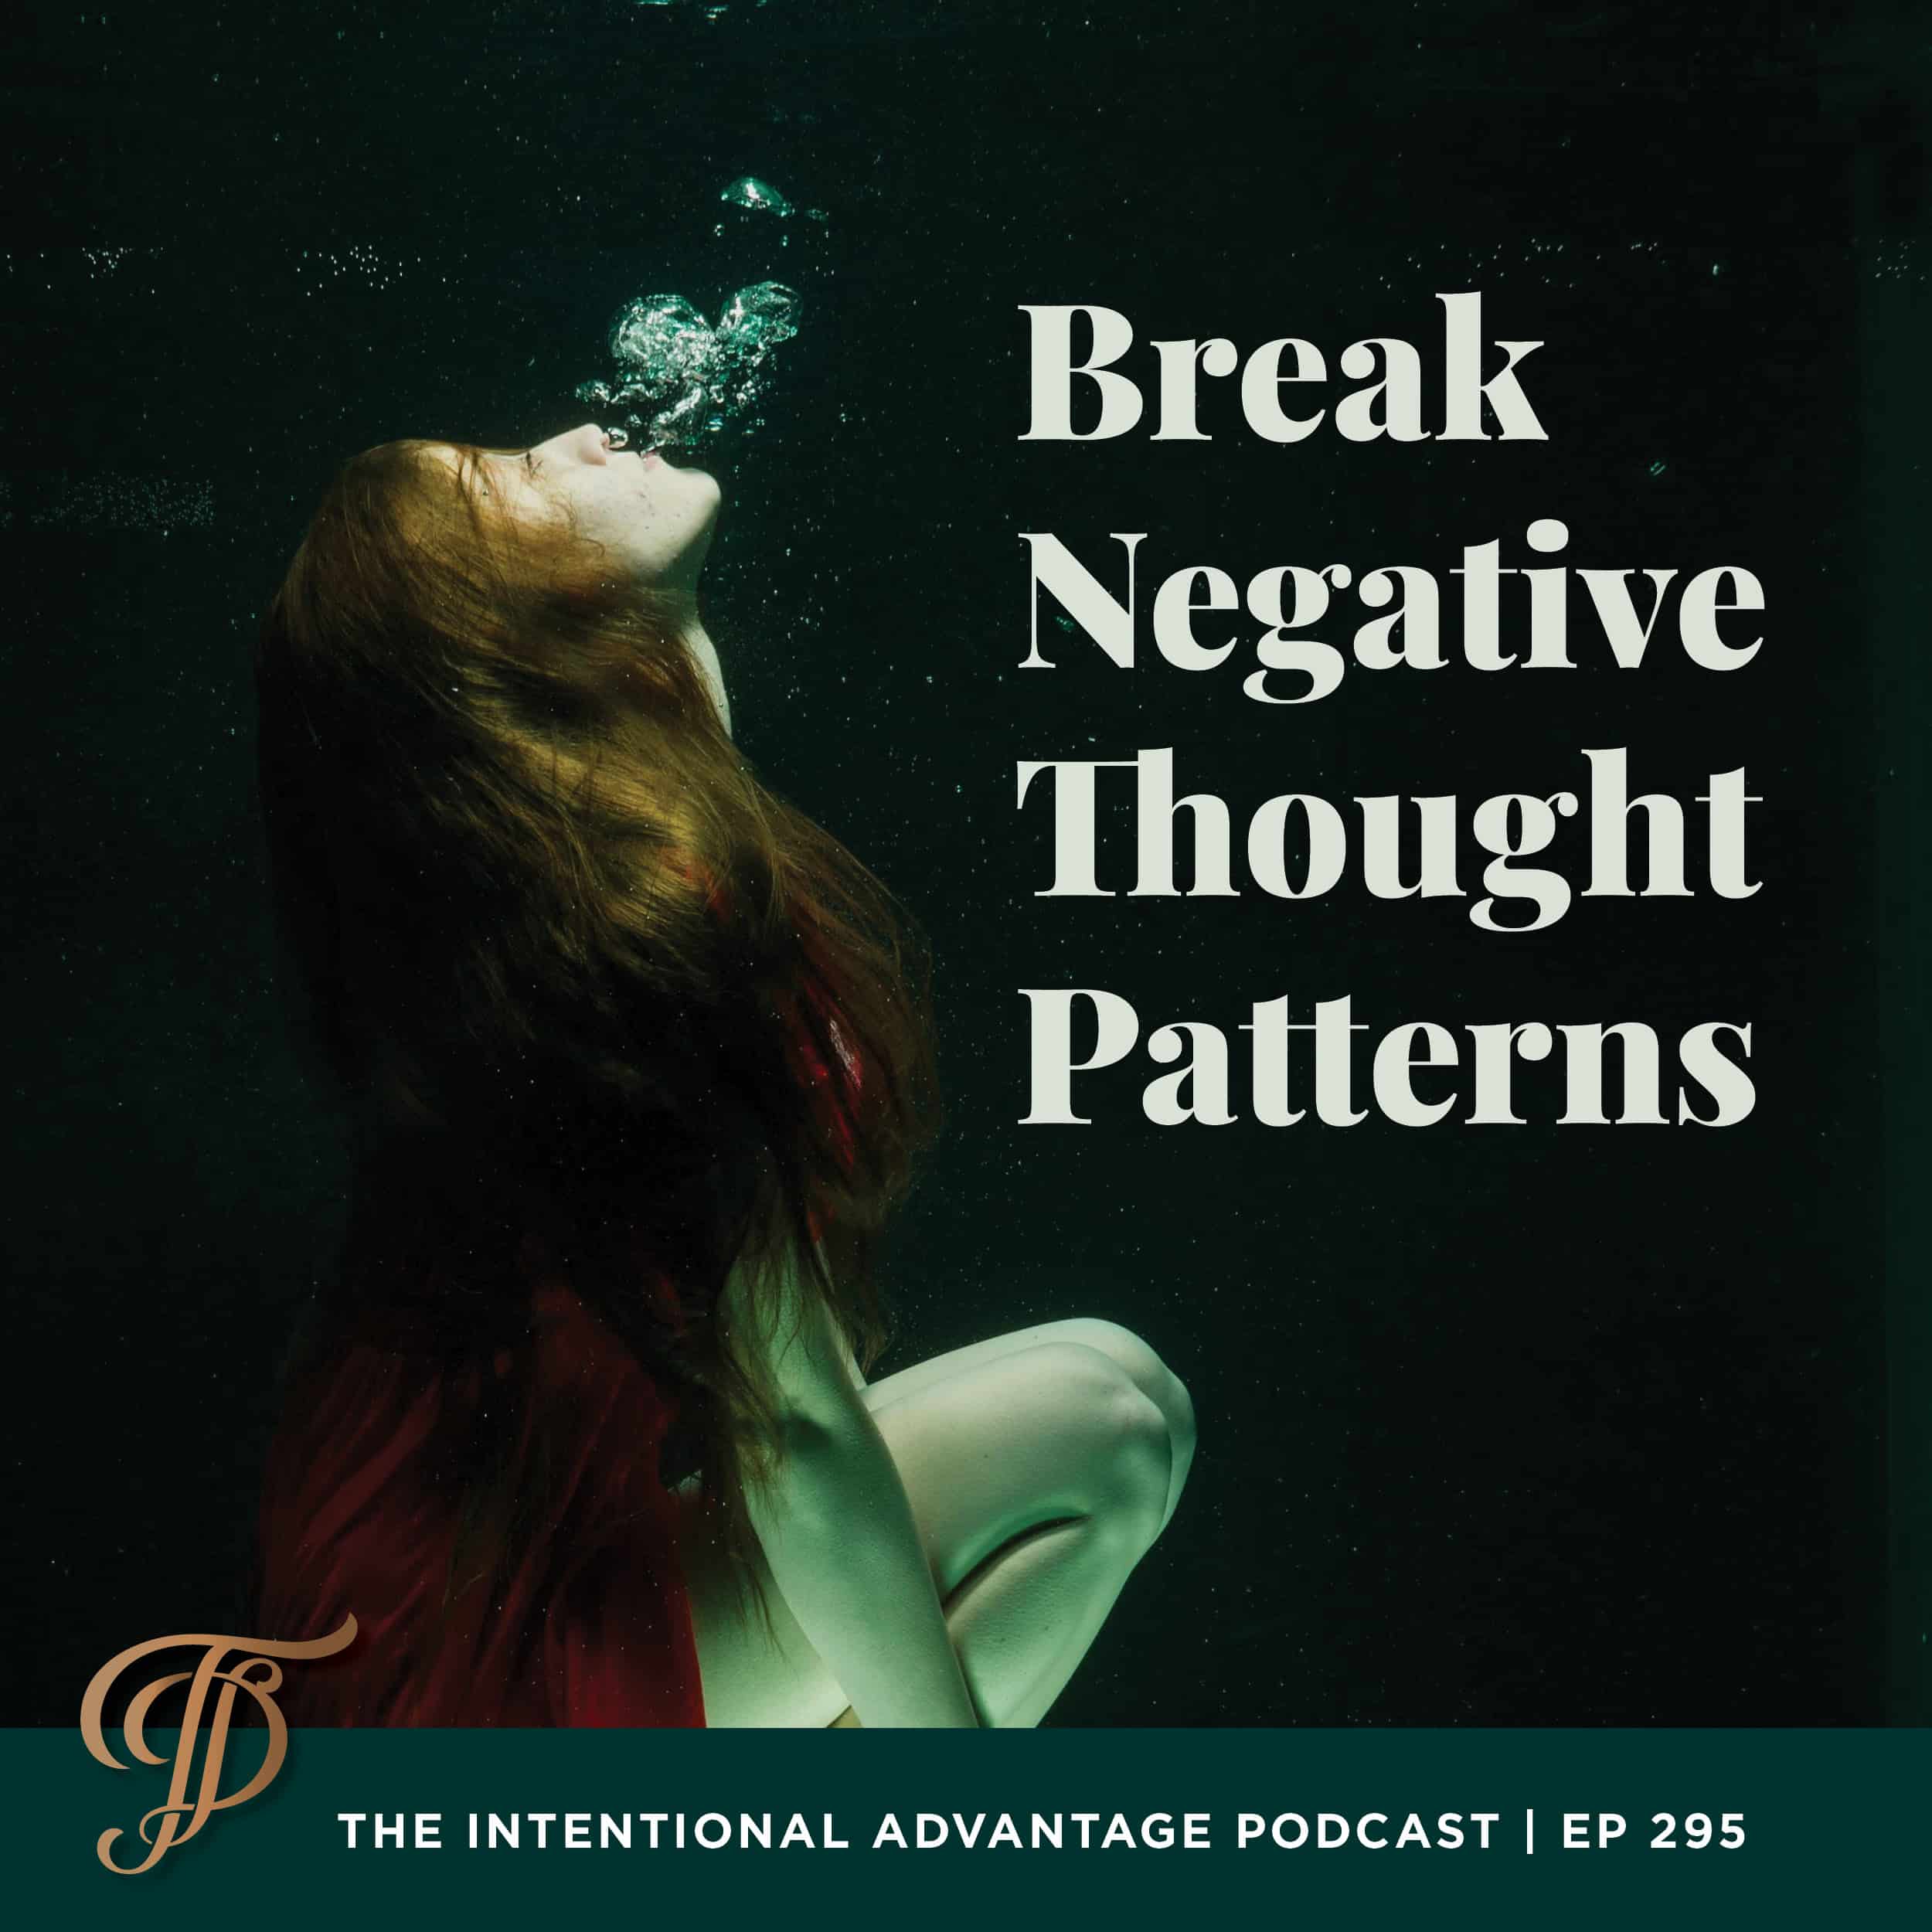 Intentional Advantage Podcast with Tanya Dalton Breaking Negative Thought Patterns with Rachel Jayne Groover